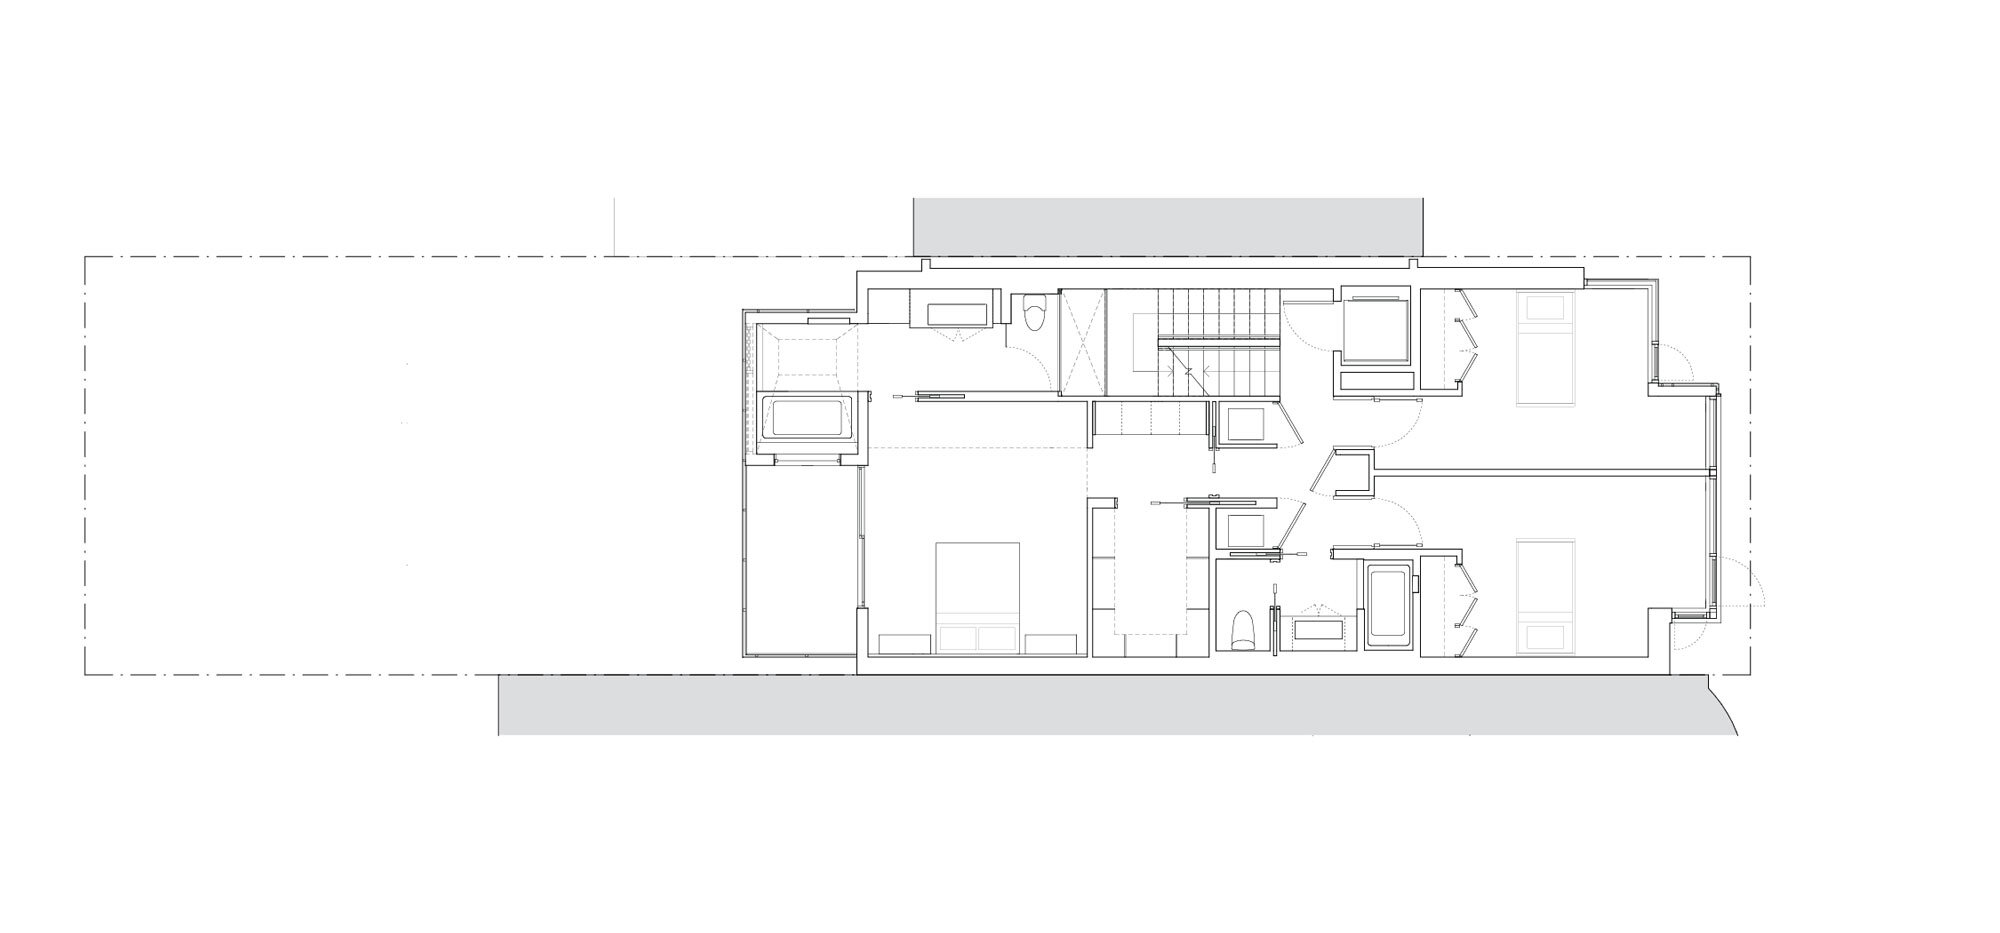 04-res4-re4a-resolution-4-architecture-park-slope-townhouse-brooklyn-modern-home-floor-plan.jpg